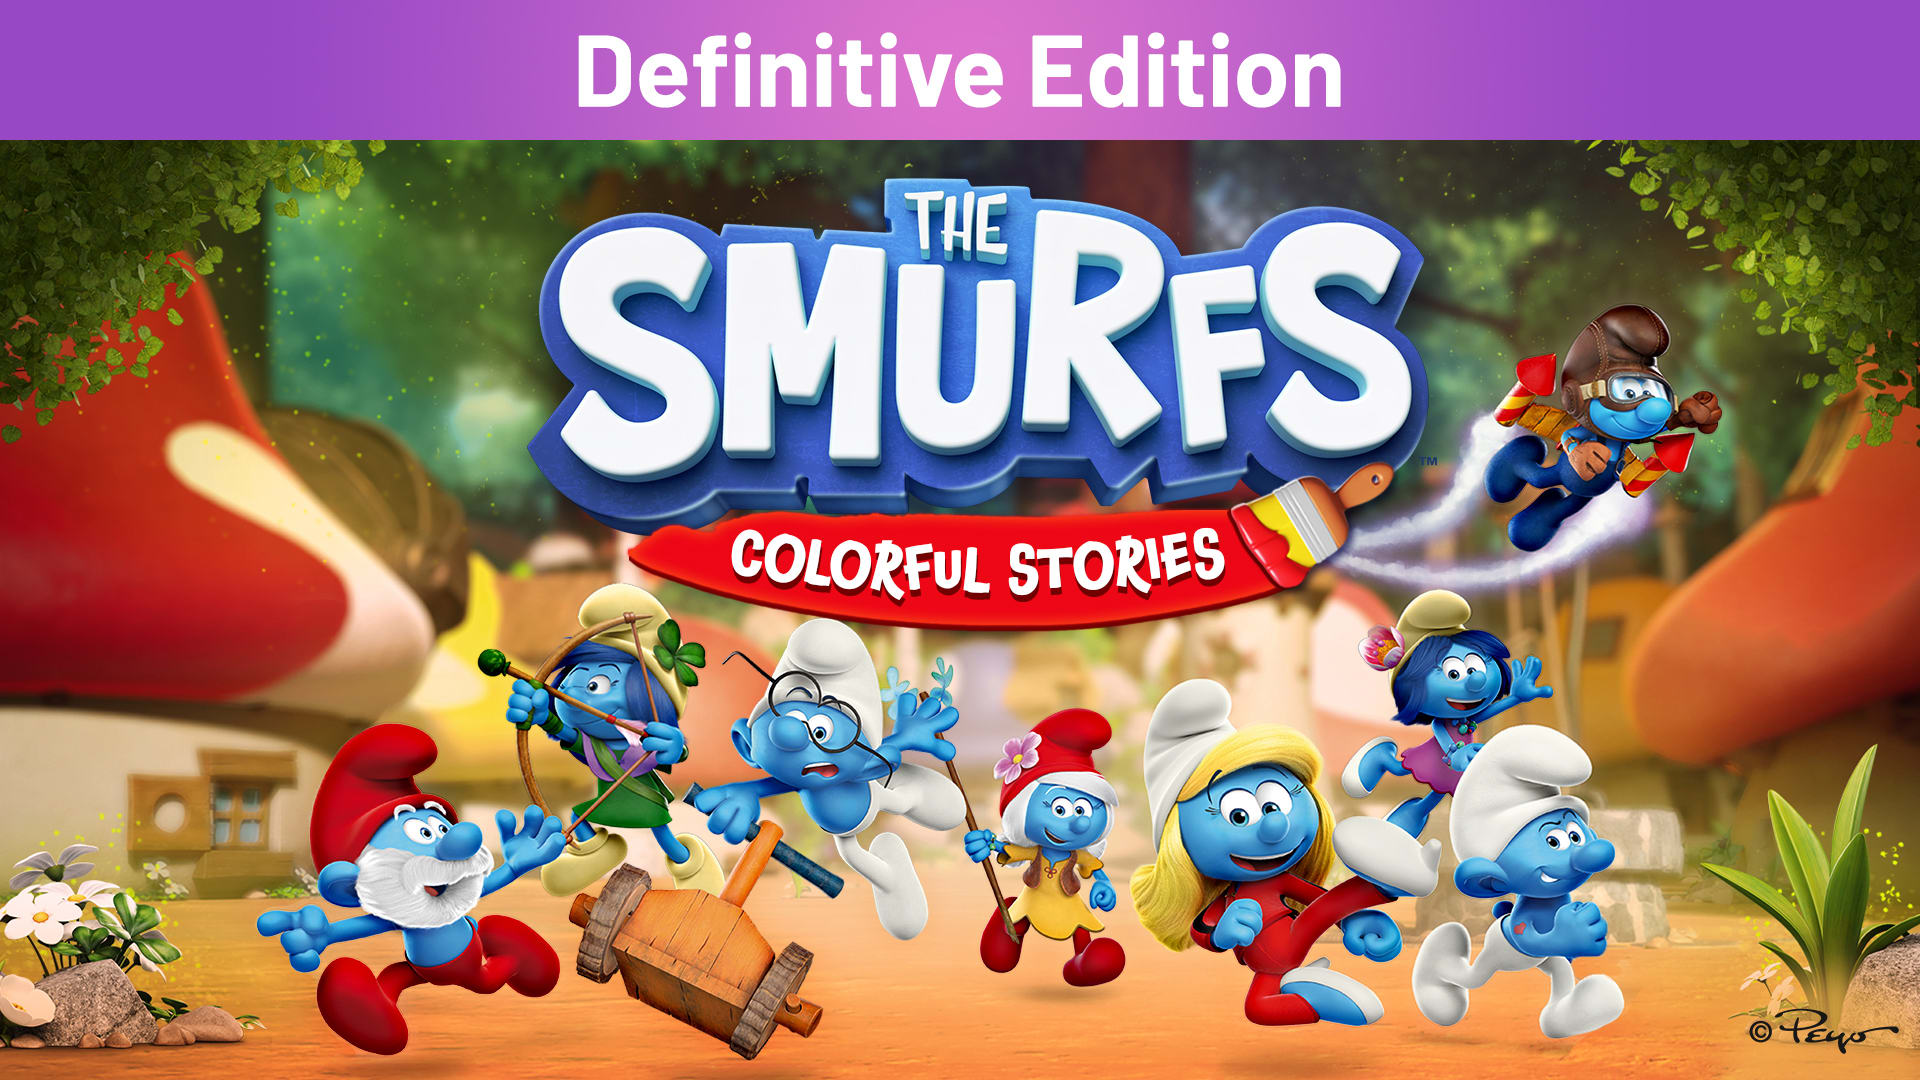 The Smurfs: Colorful Stories Definitive Edition